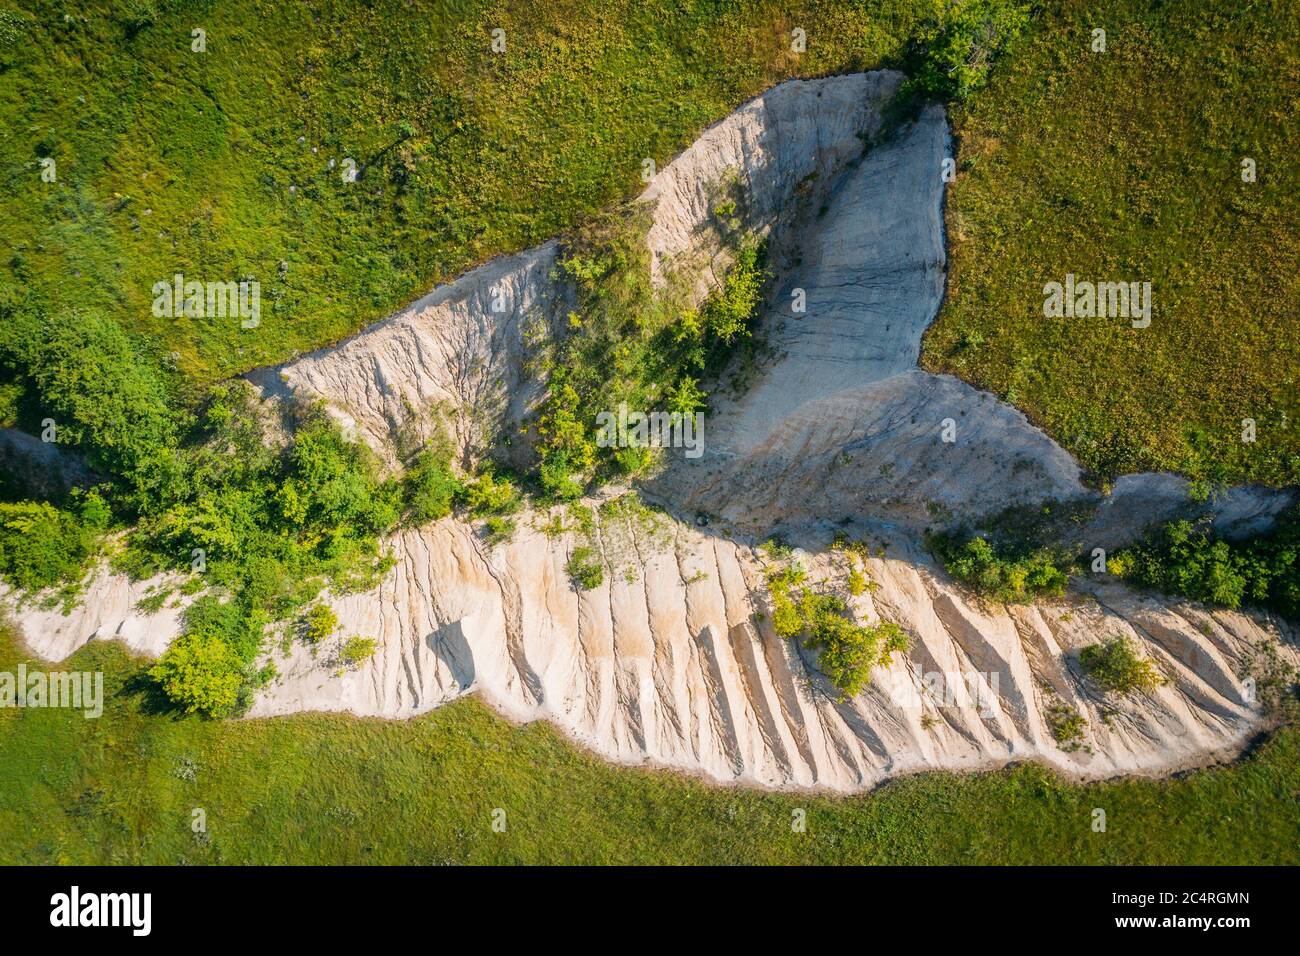 Chalk crevice or ravine among green grass meadow hills, aerial top view, abstract nature background. Stock Photo